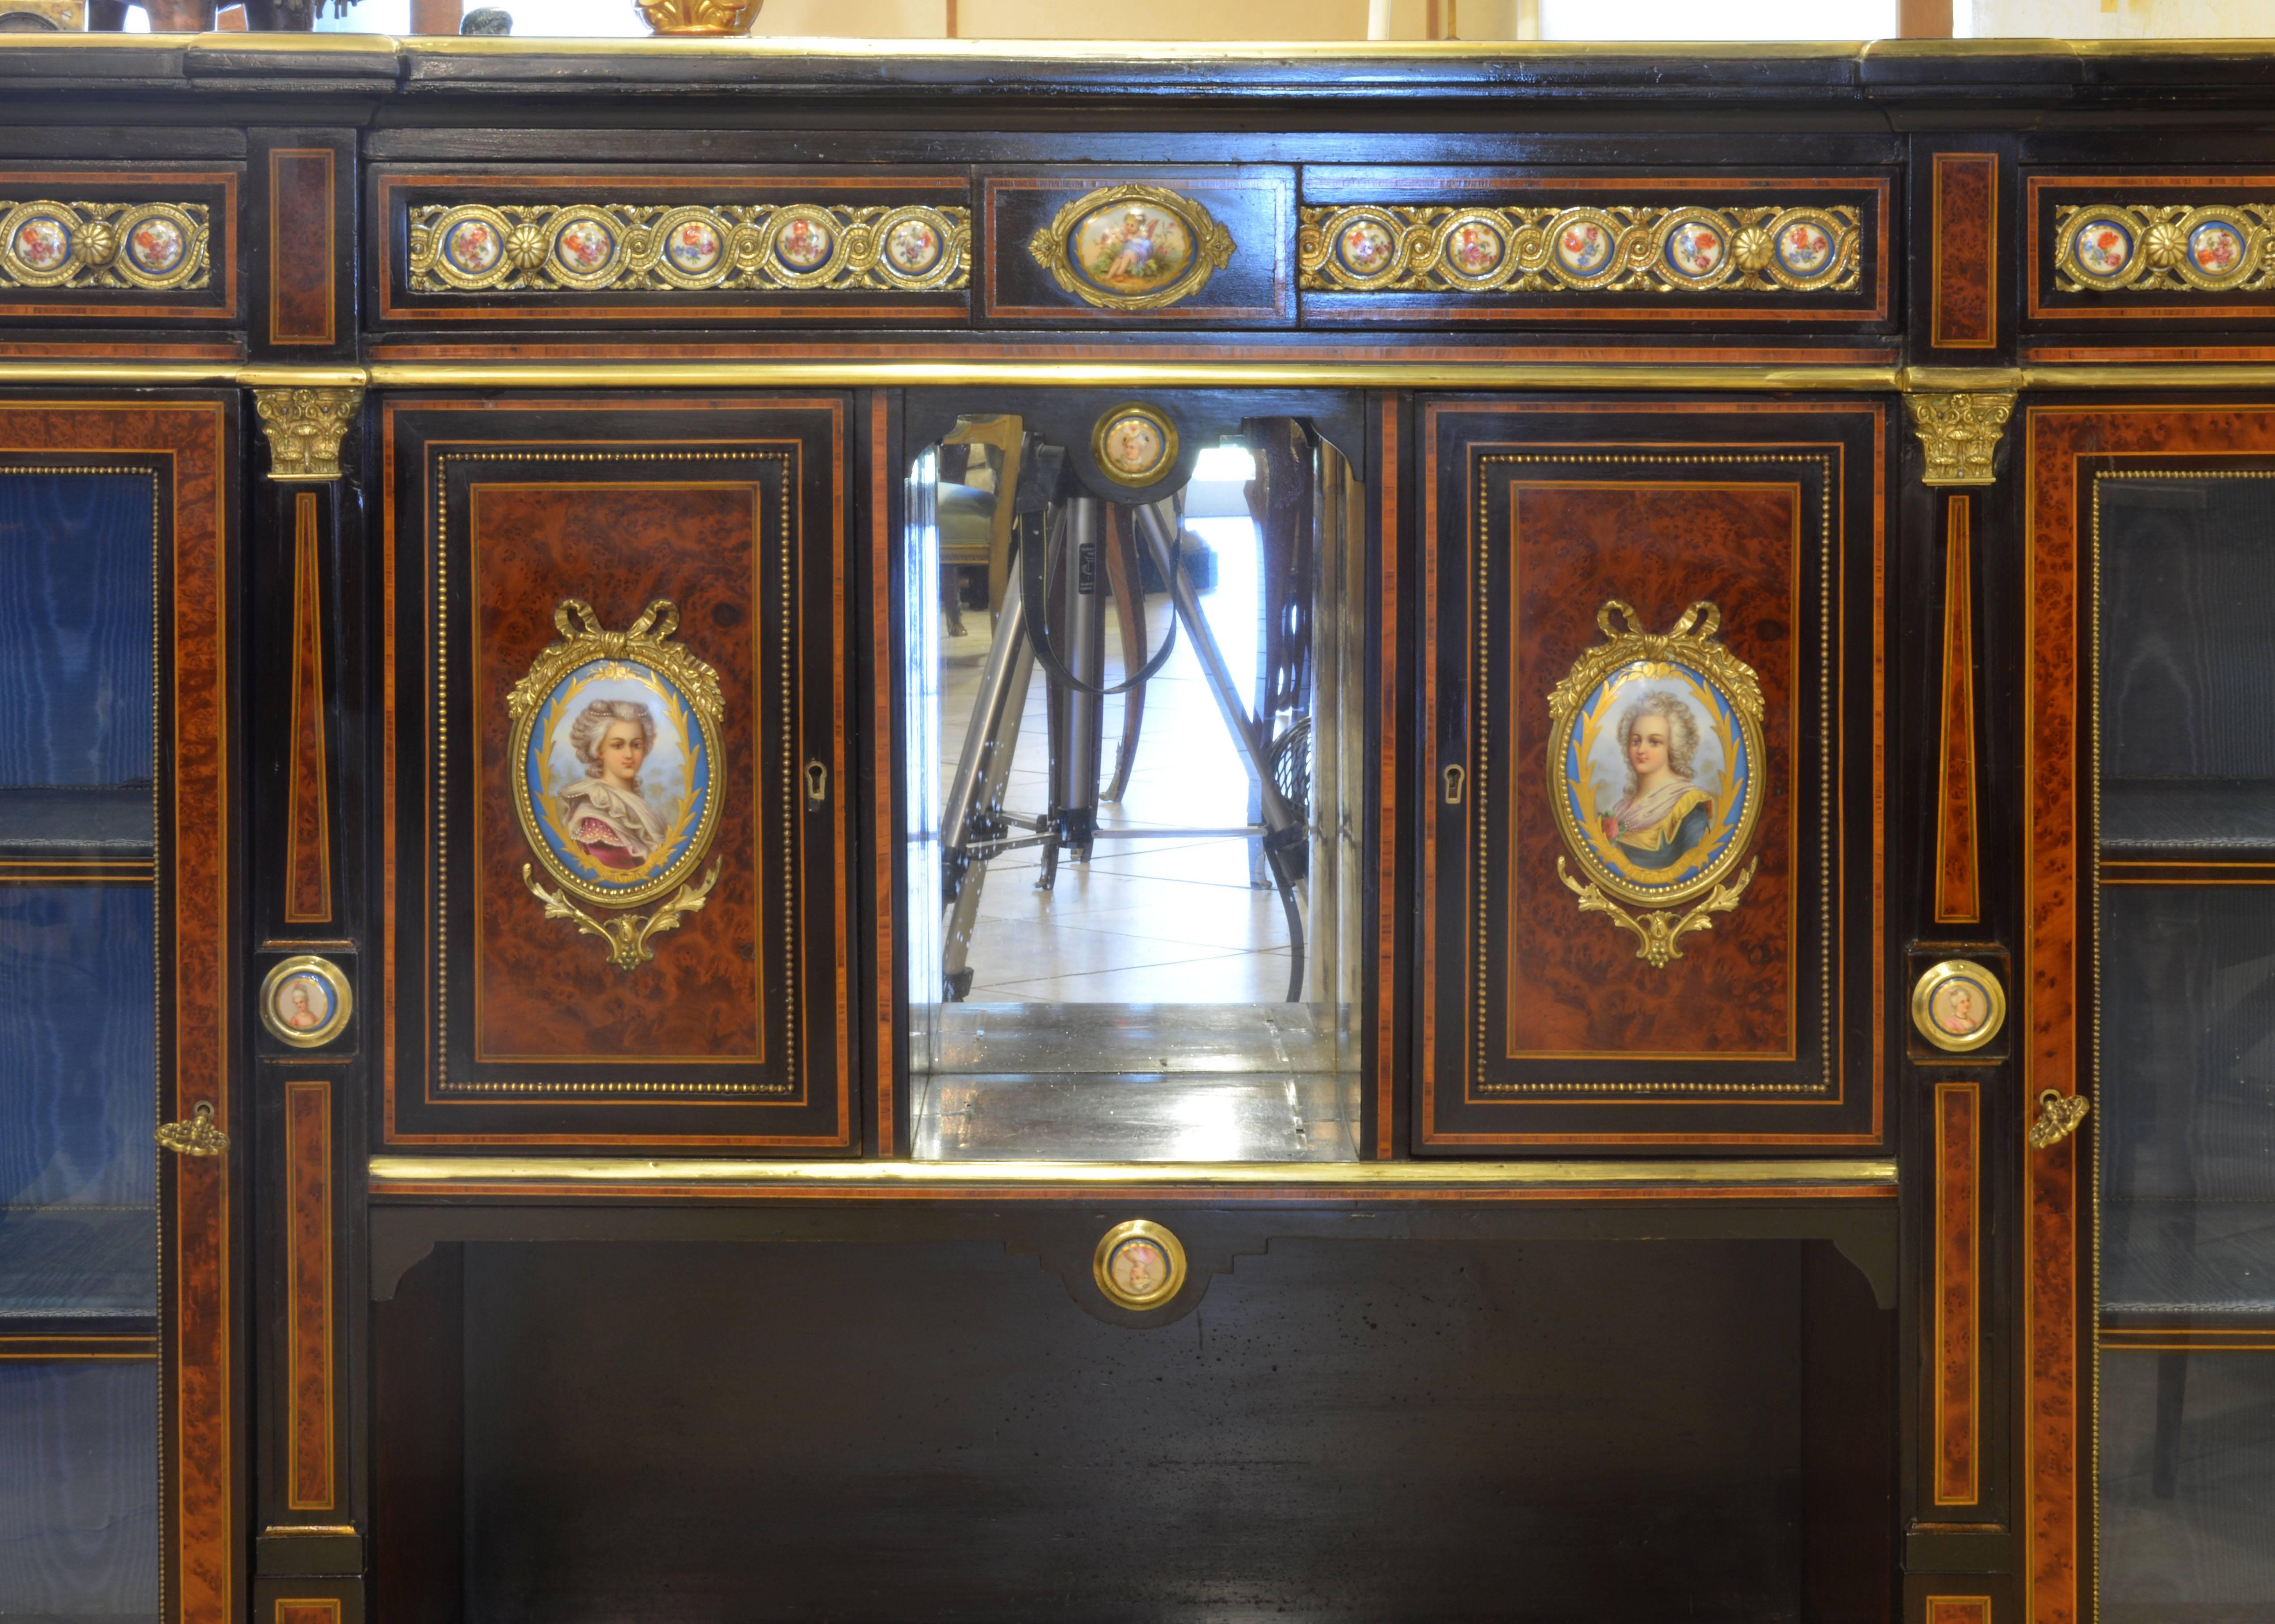 Louis XVI English 19th Cent. Ormolu and Sevres Plaque Mounted Inlaid Burl Walnut Credenza